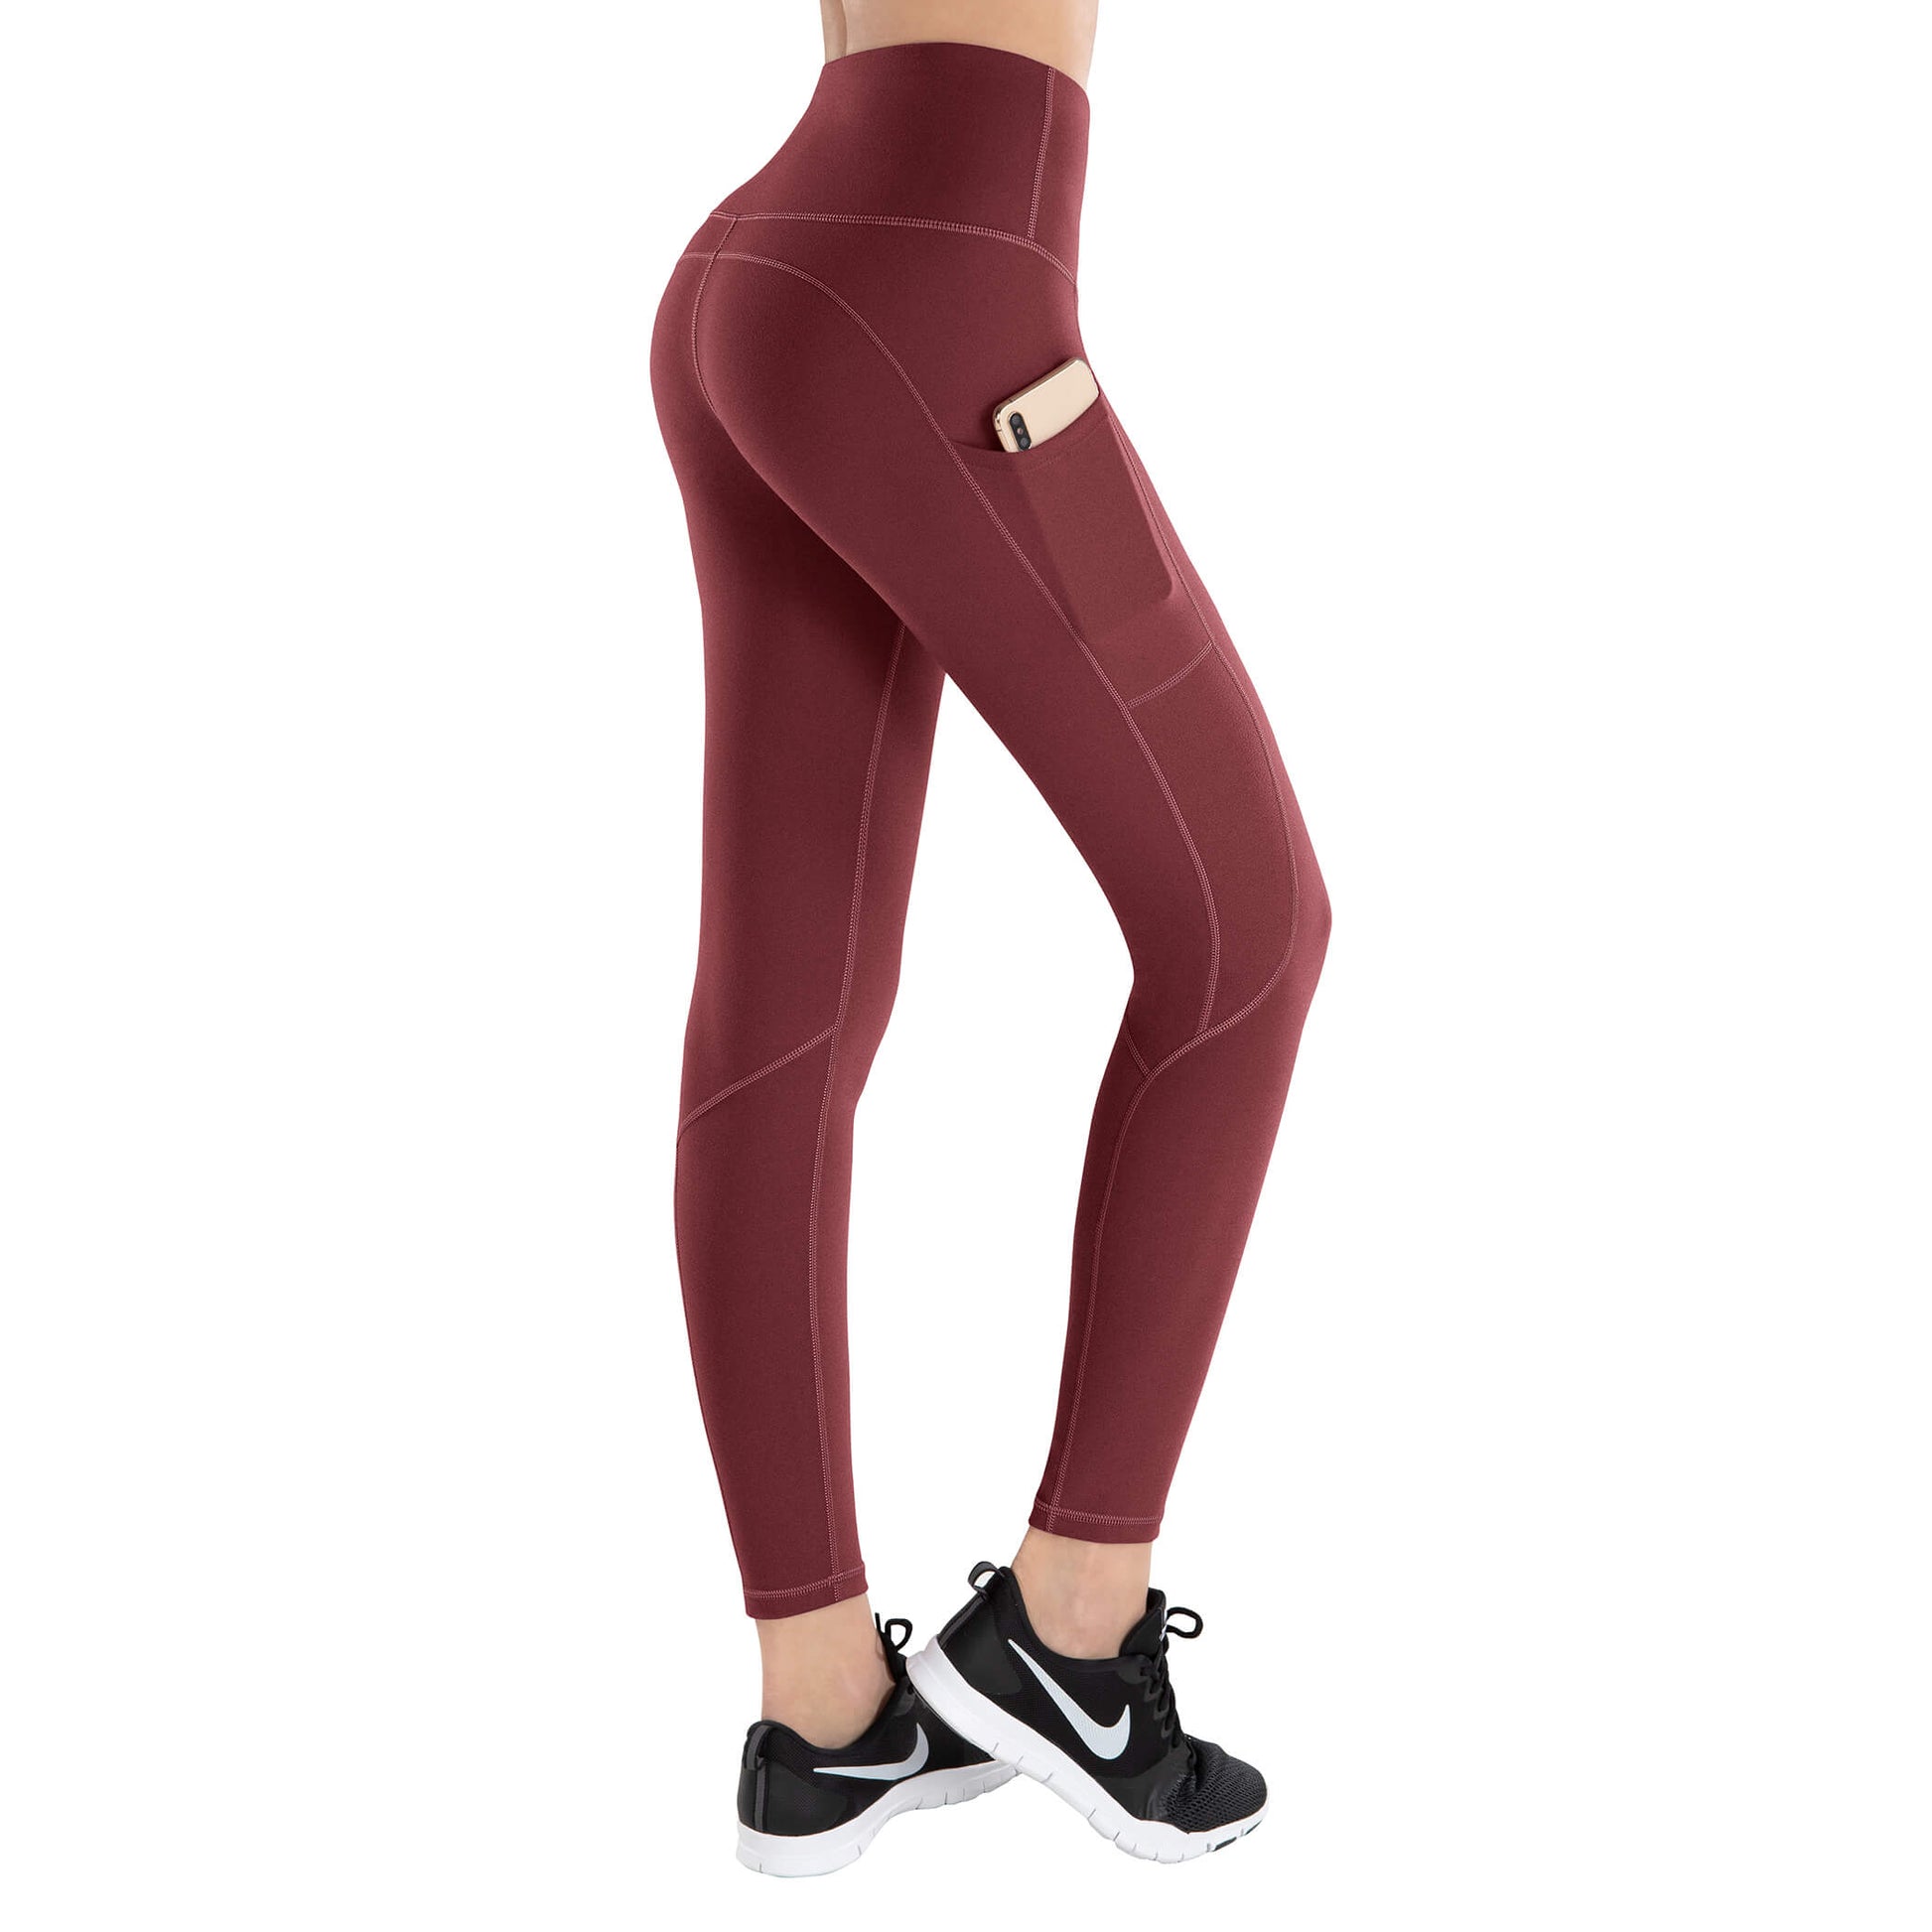 Buy LifeSky Yoga Pants with Pockets for Women, High Waisted Tummy